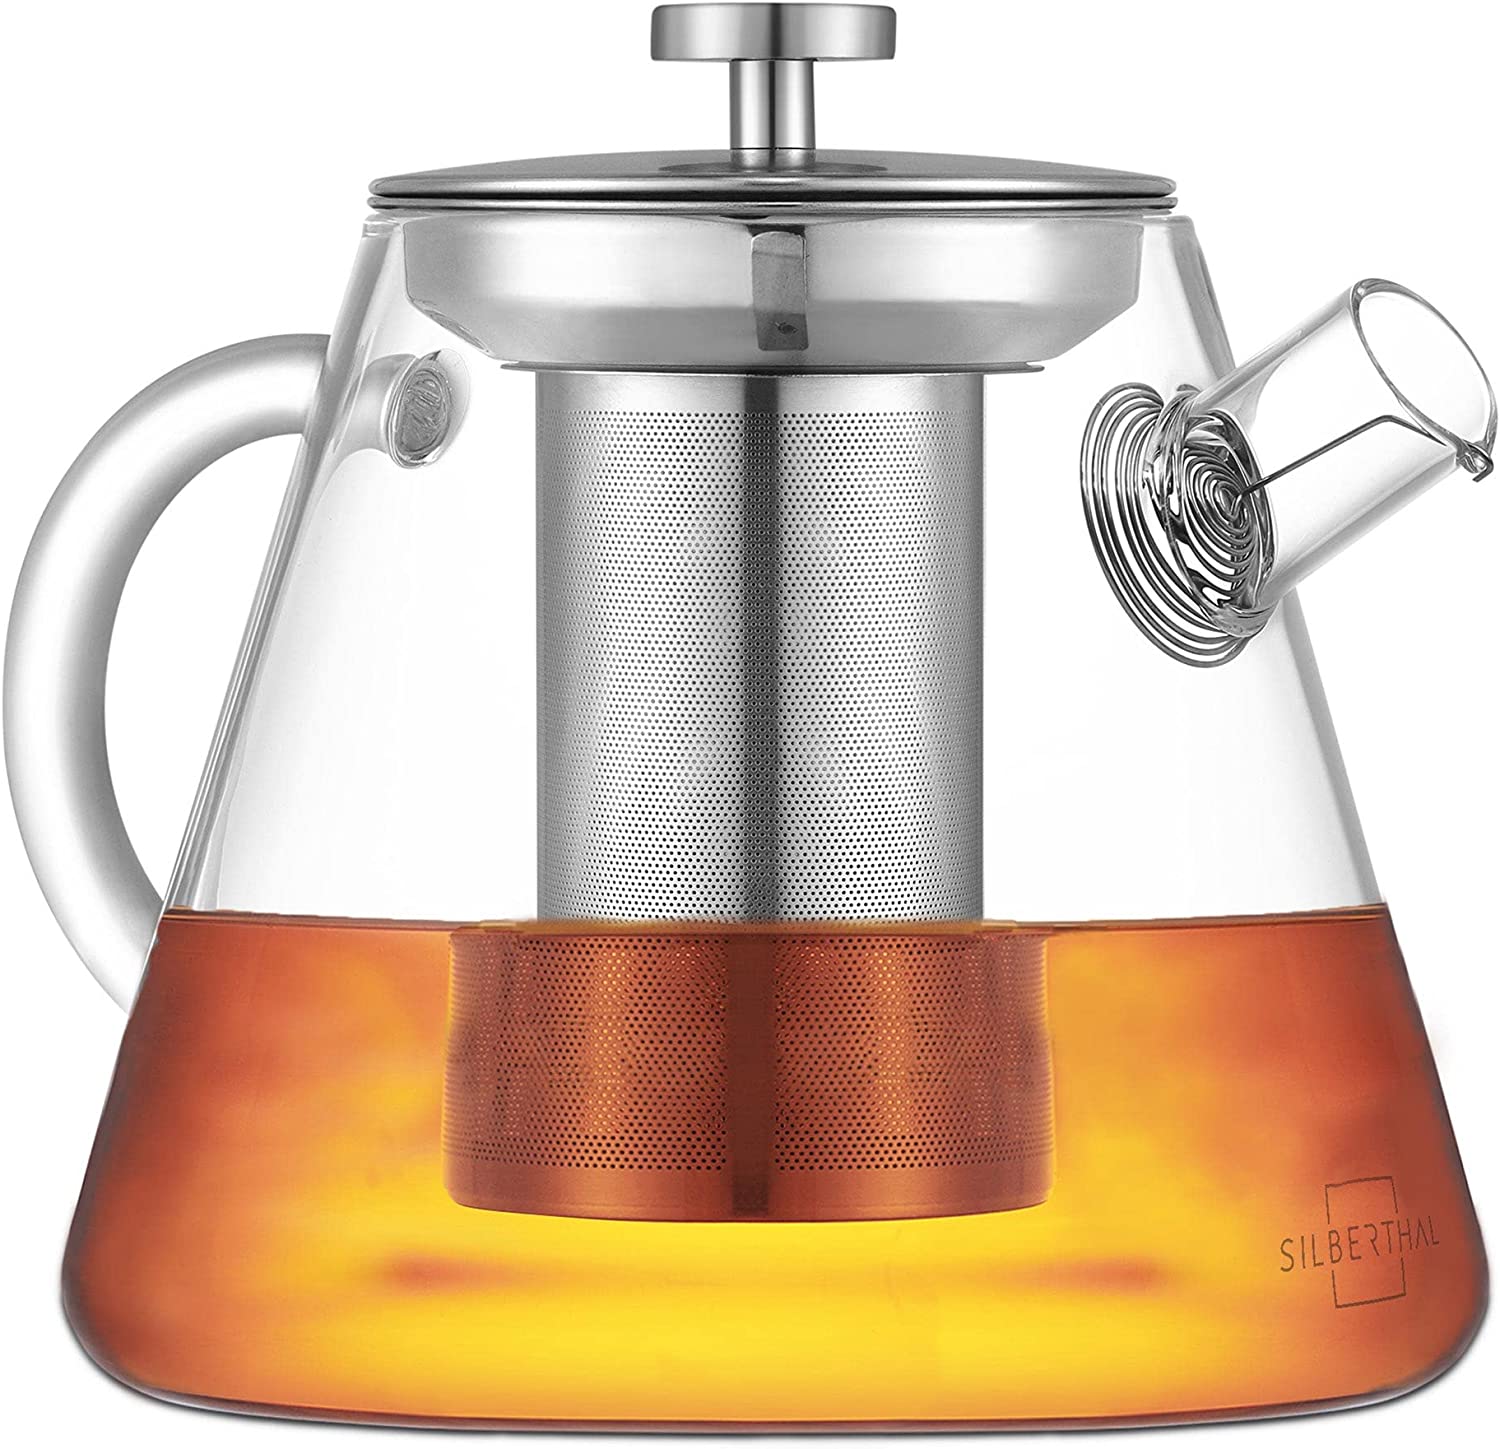 Silberthal Teapot with Strainer Glass 1.5 Litres Full Tea Aroma with Long Strainer Insert